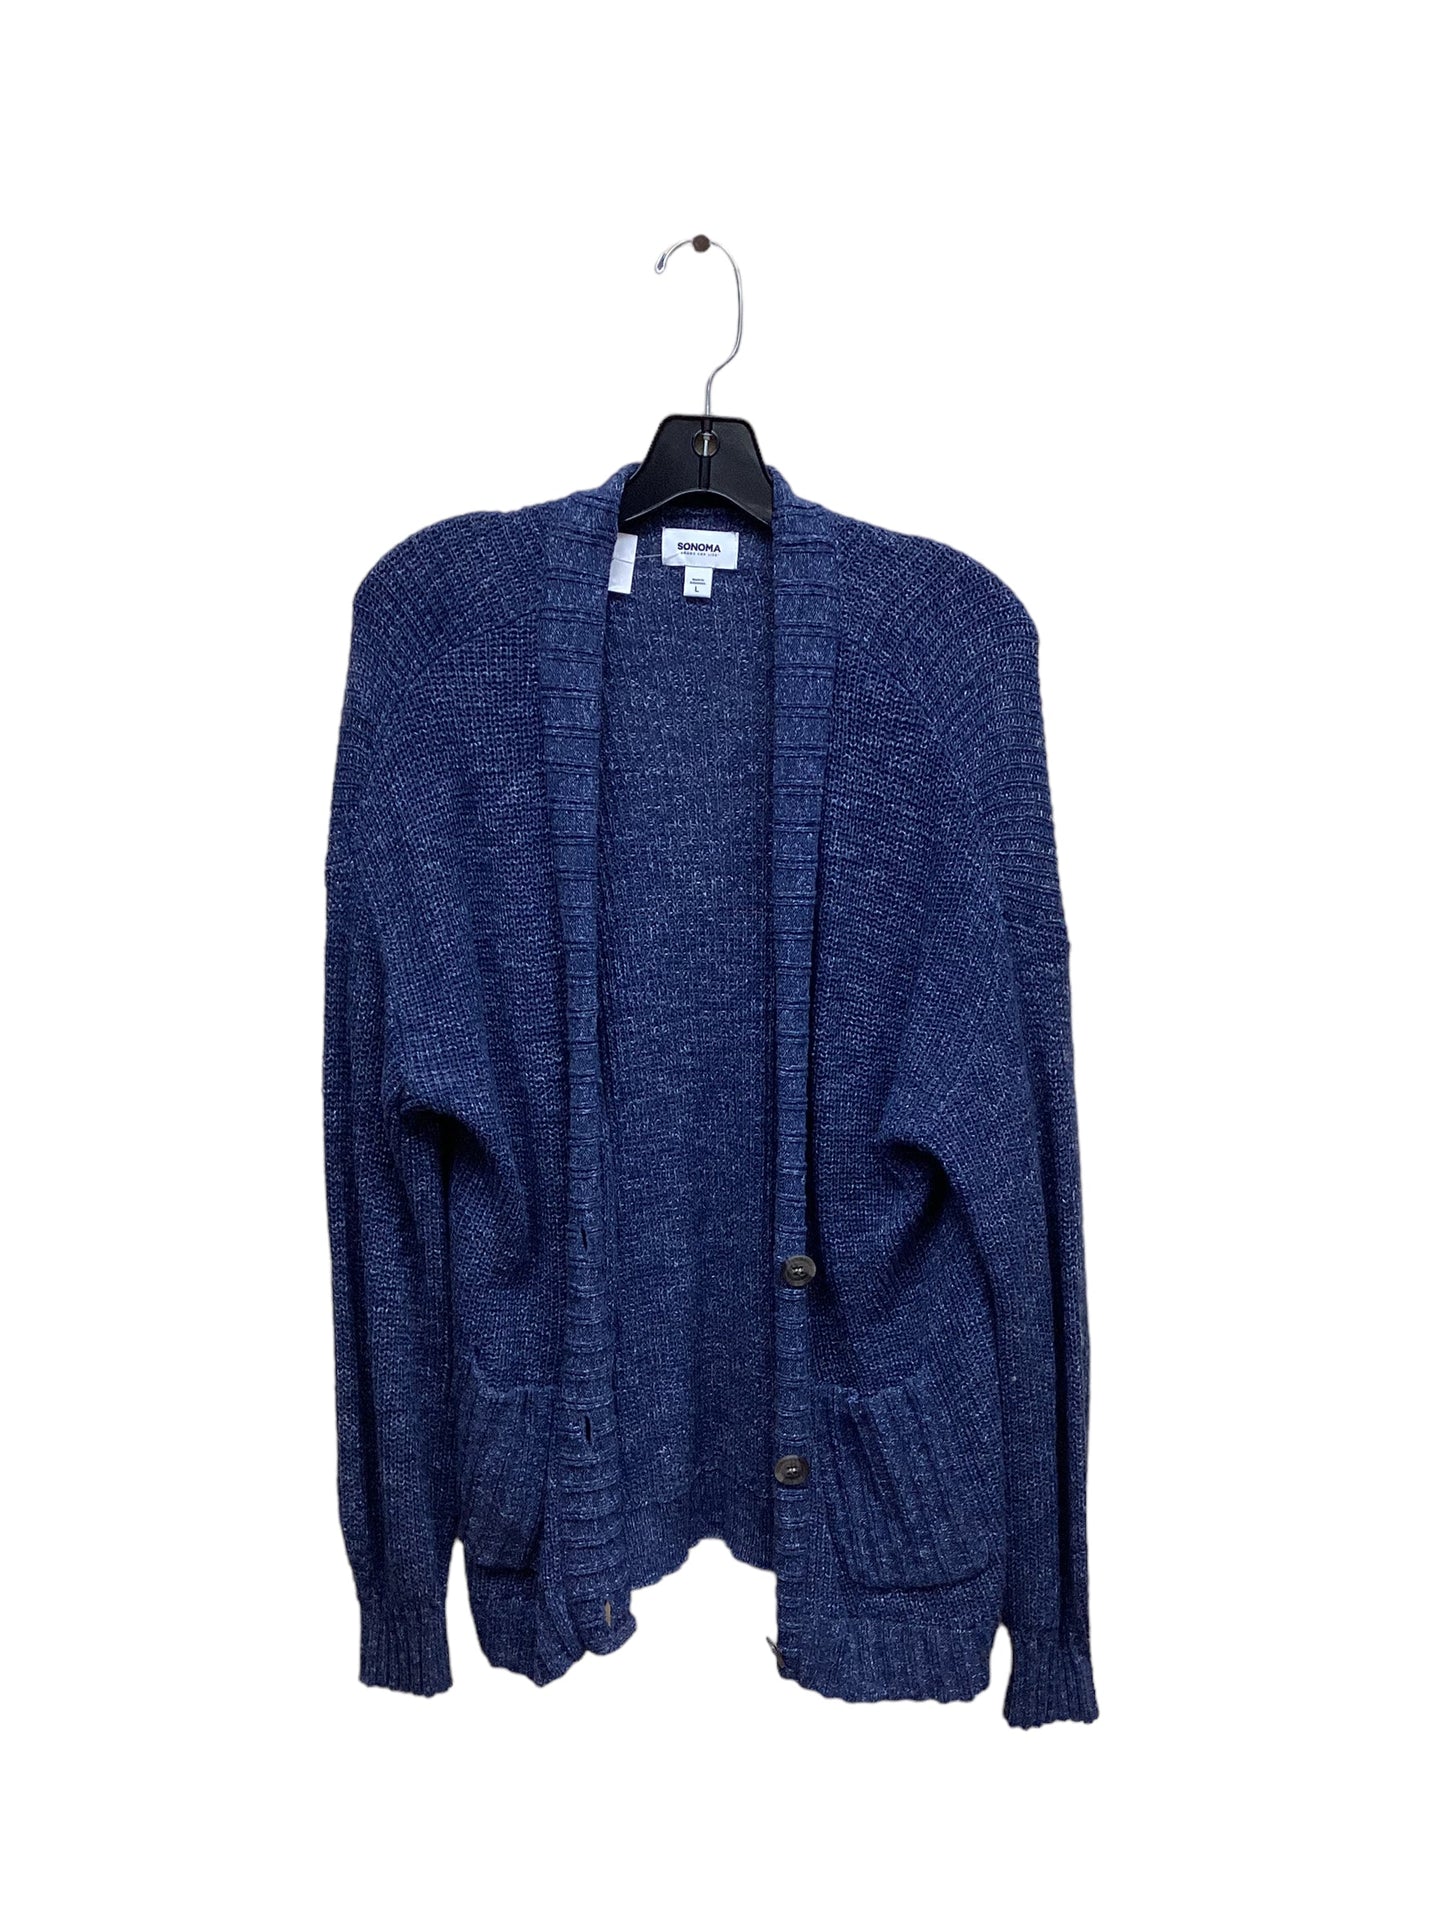 Sweater Cardigan By Sonoma  Size: L